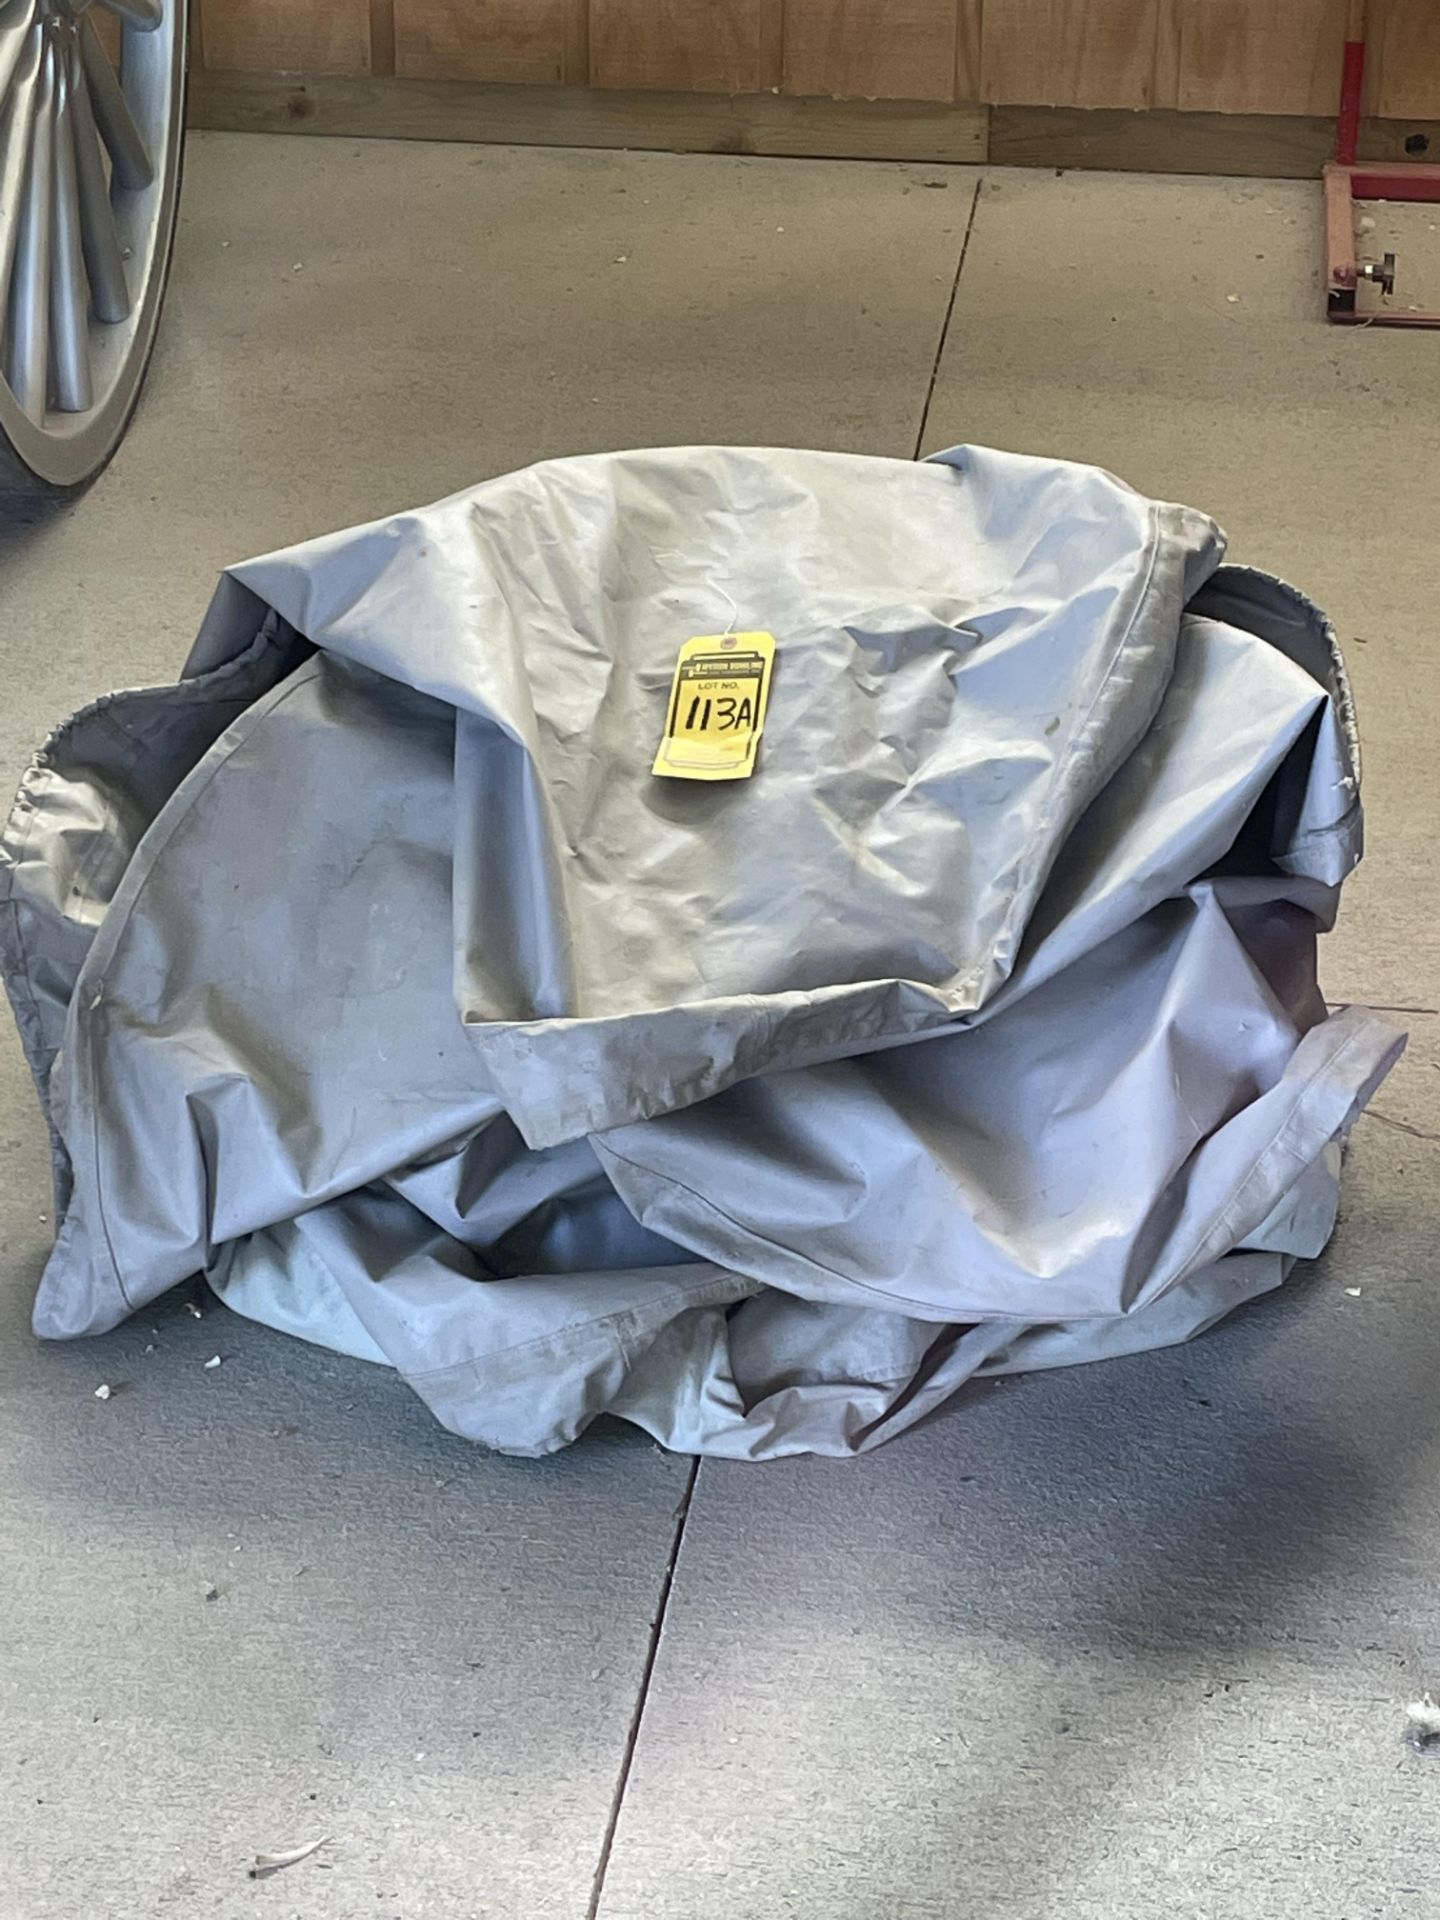 Full Covering Tarps for lot 113, Incl. Wheel Covers and full Wagon Cover - Image 2 of 2